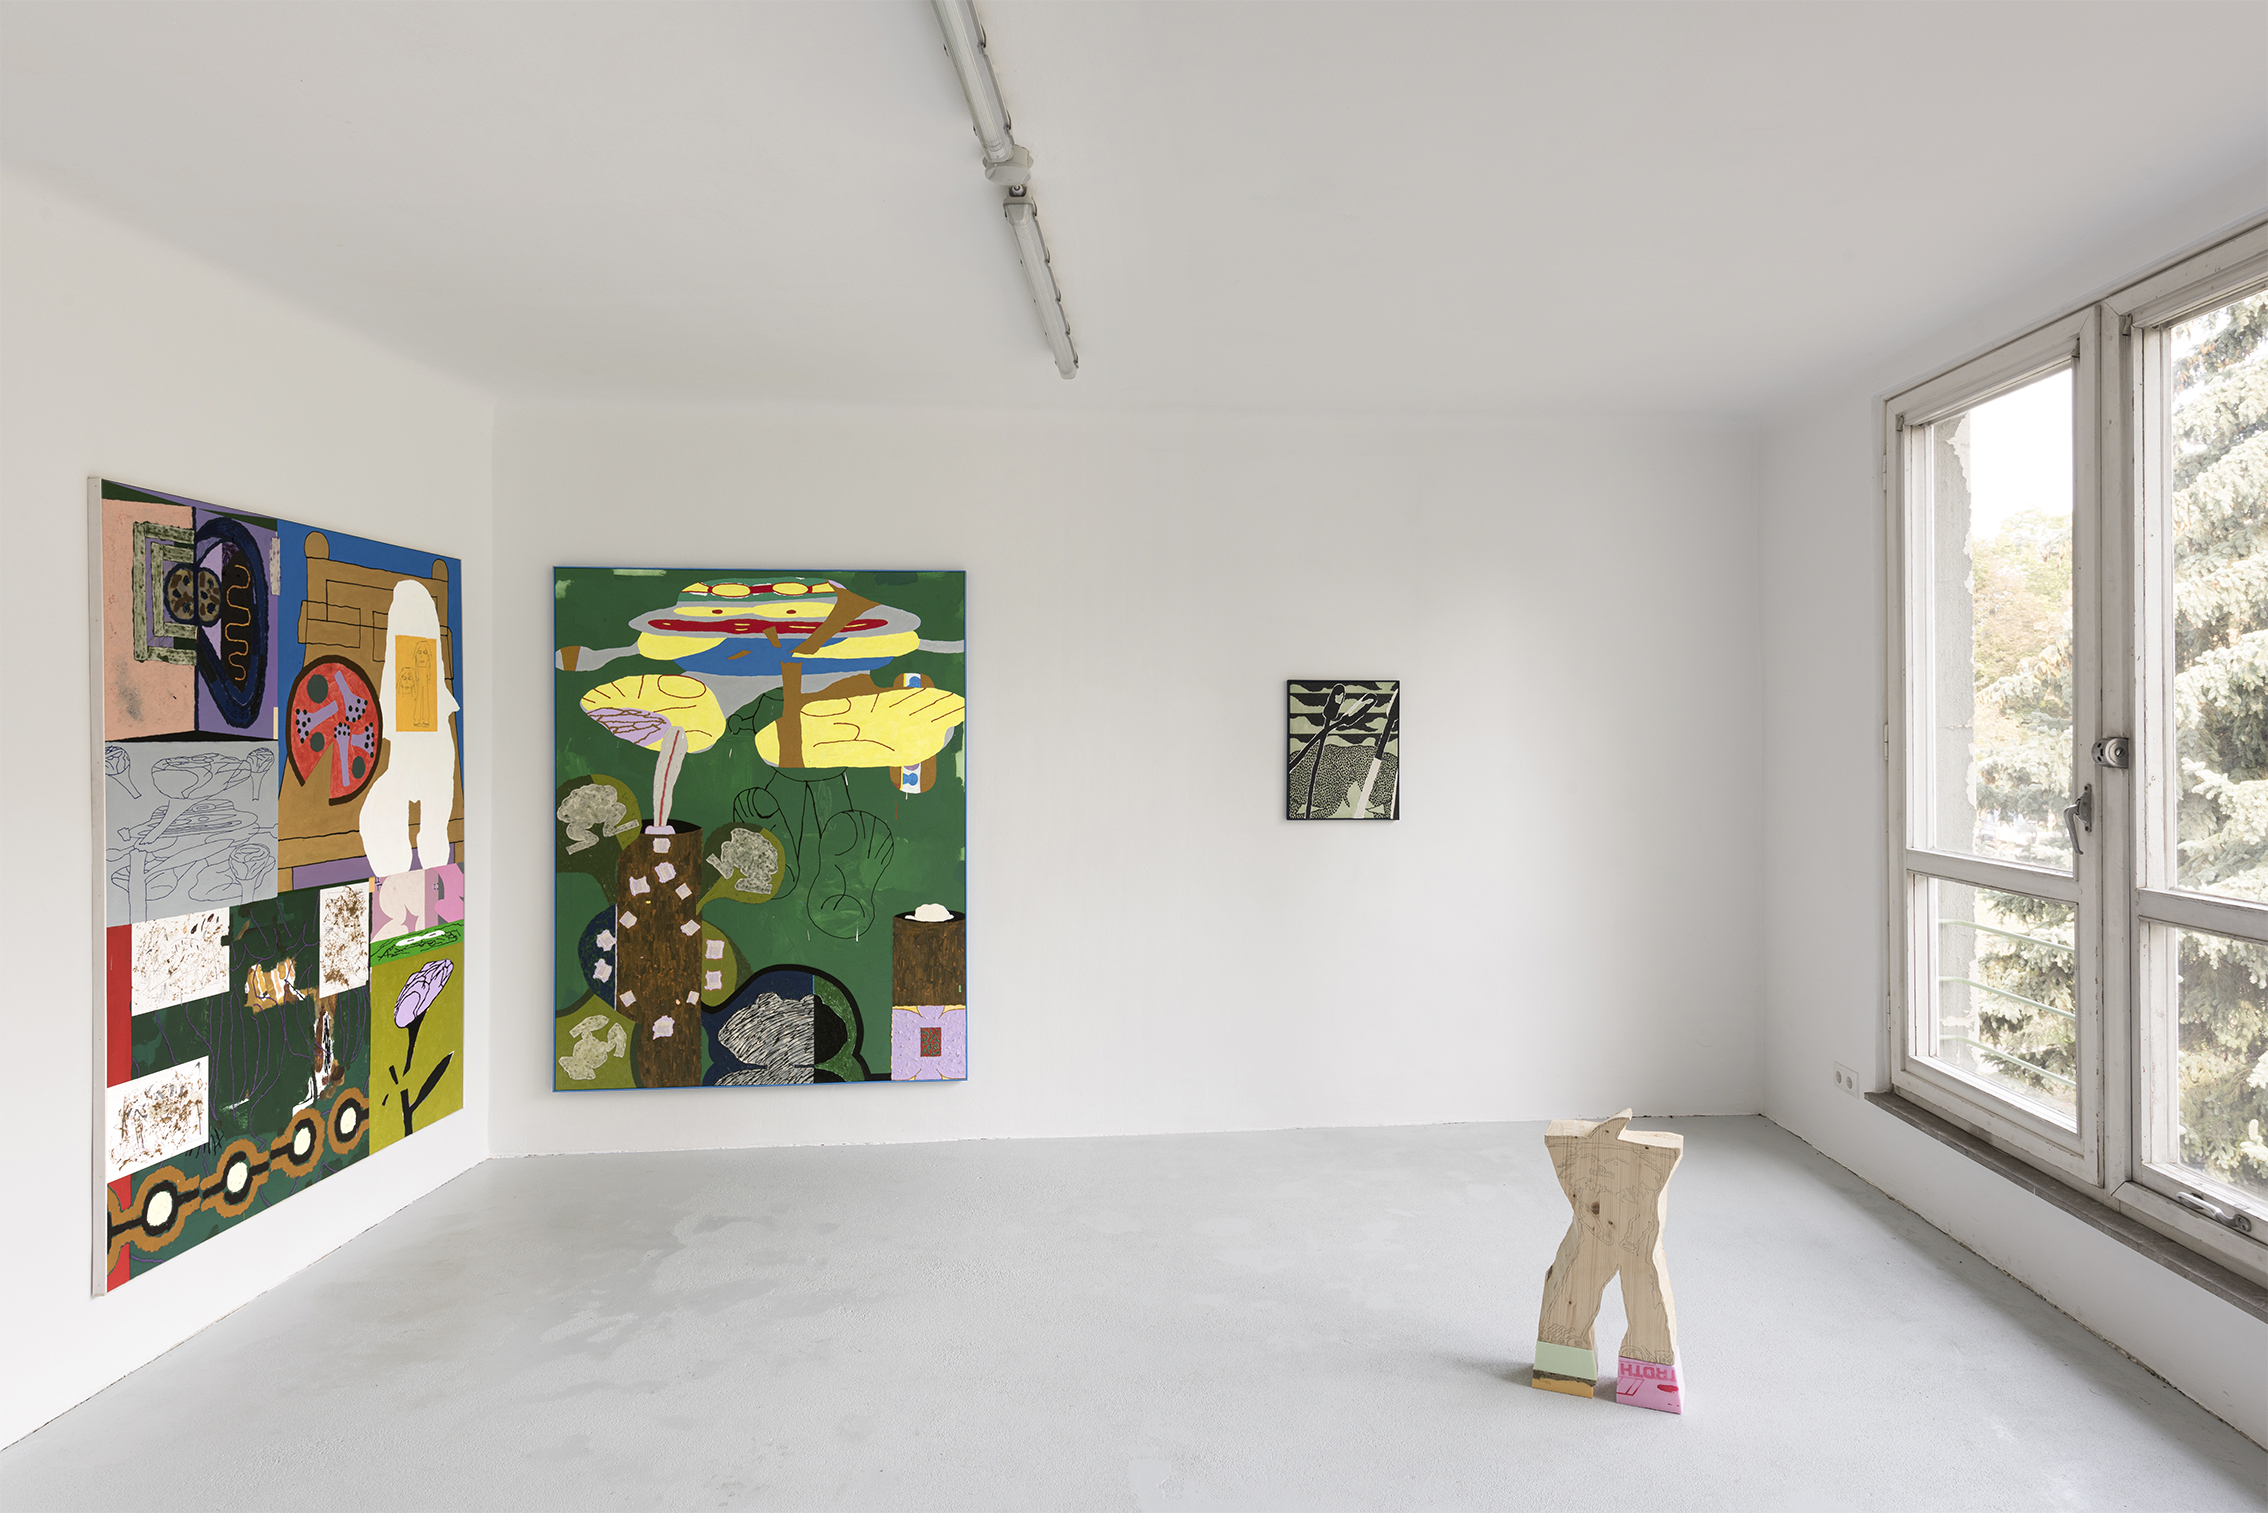 Max Freund and Paul Waak / Exhibition view